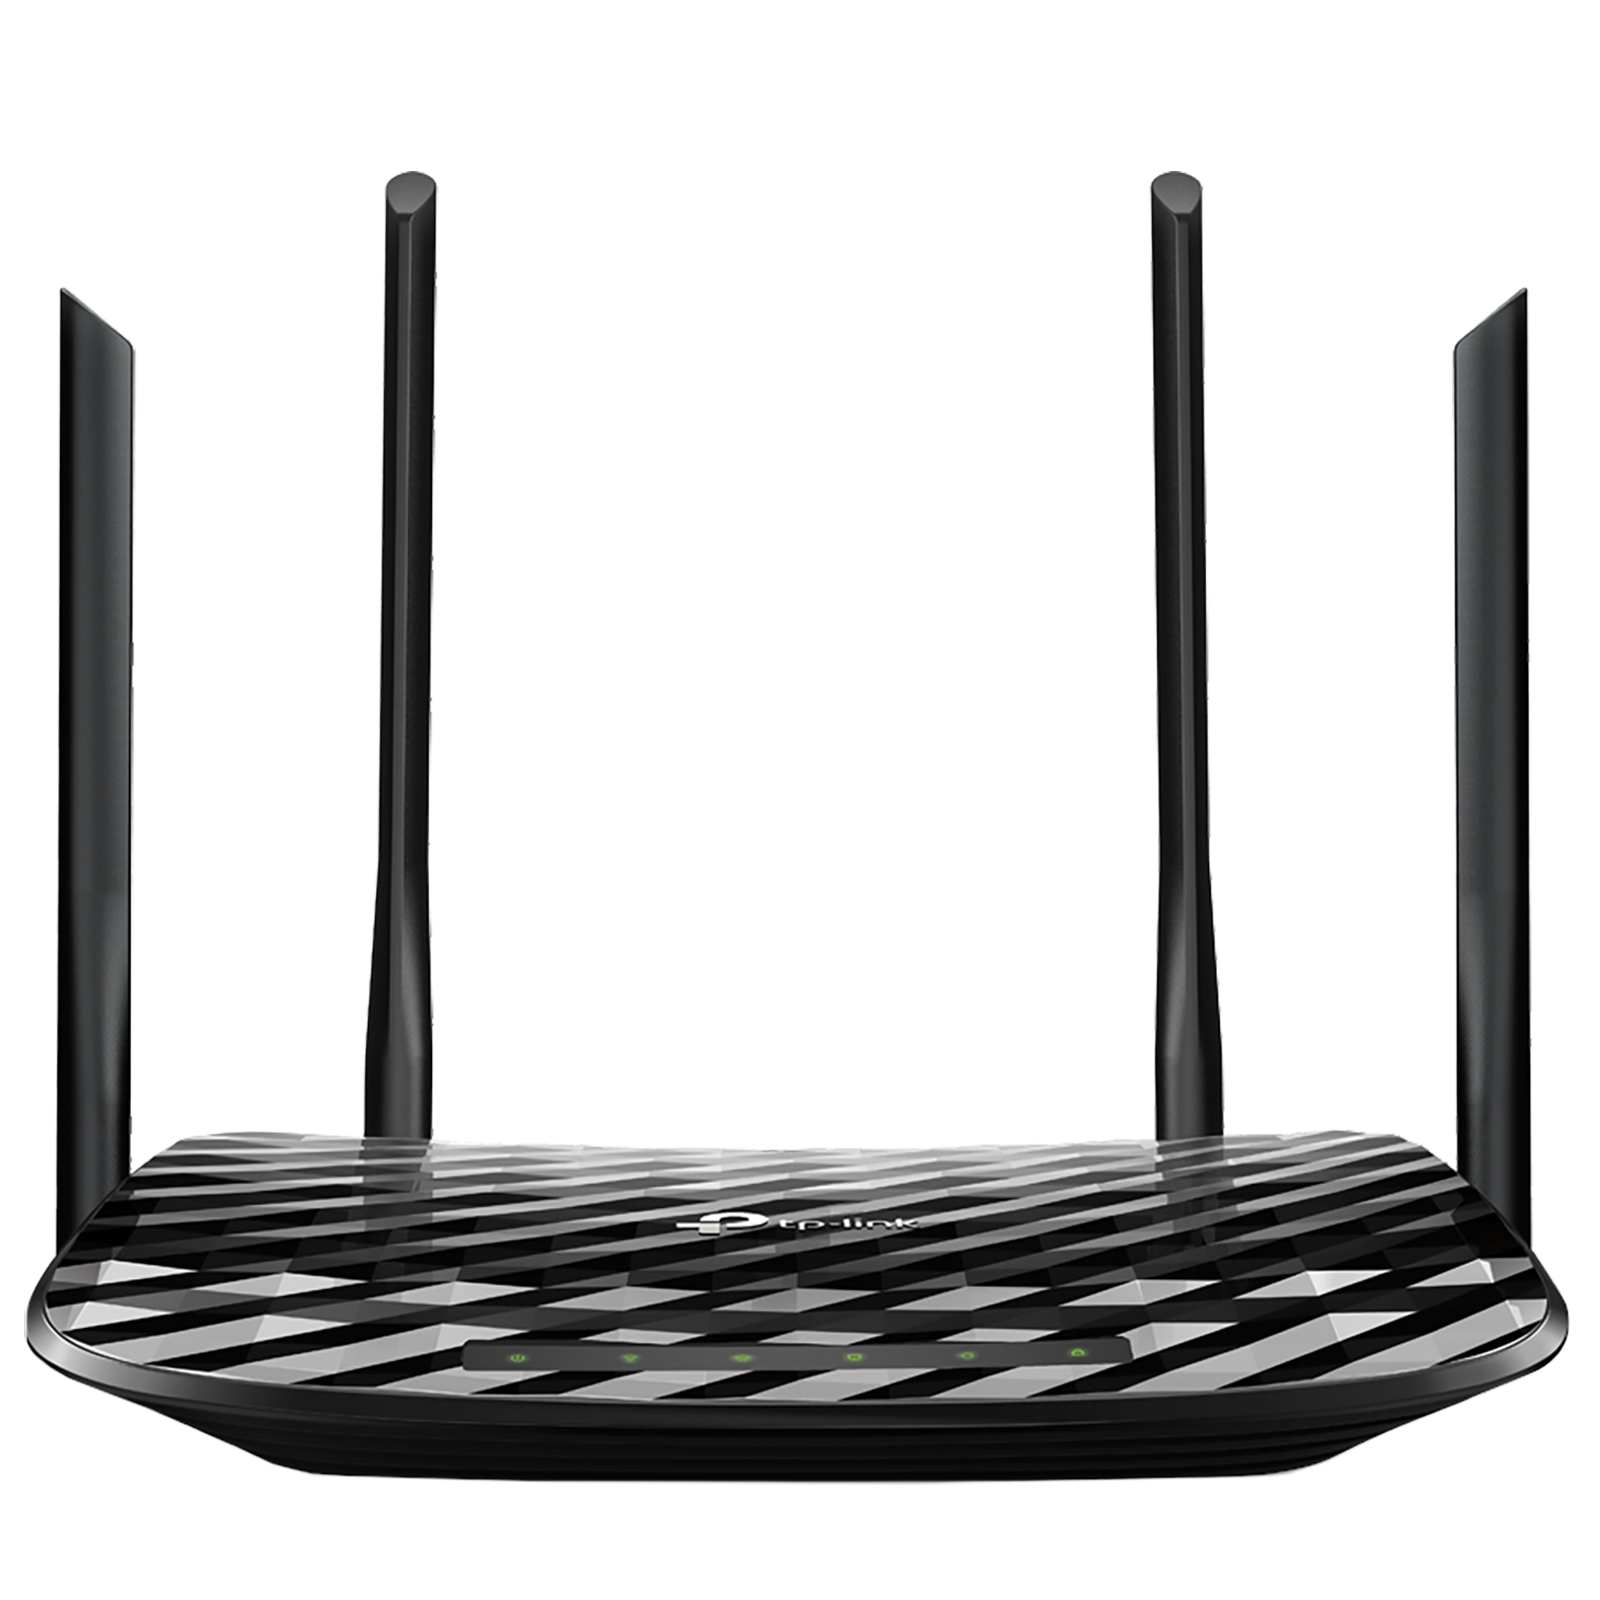 Tp-Link - Tp-Link Archer C6 AC1200 Dual Band Wi-Fi Router (4 Antennas, 4 LAN Ports, 10x Faster, 150503281, Black)